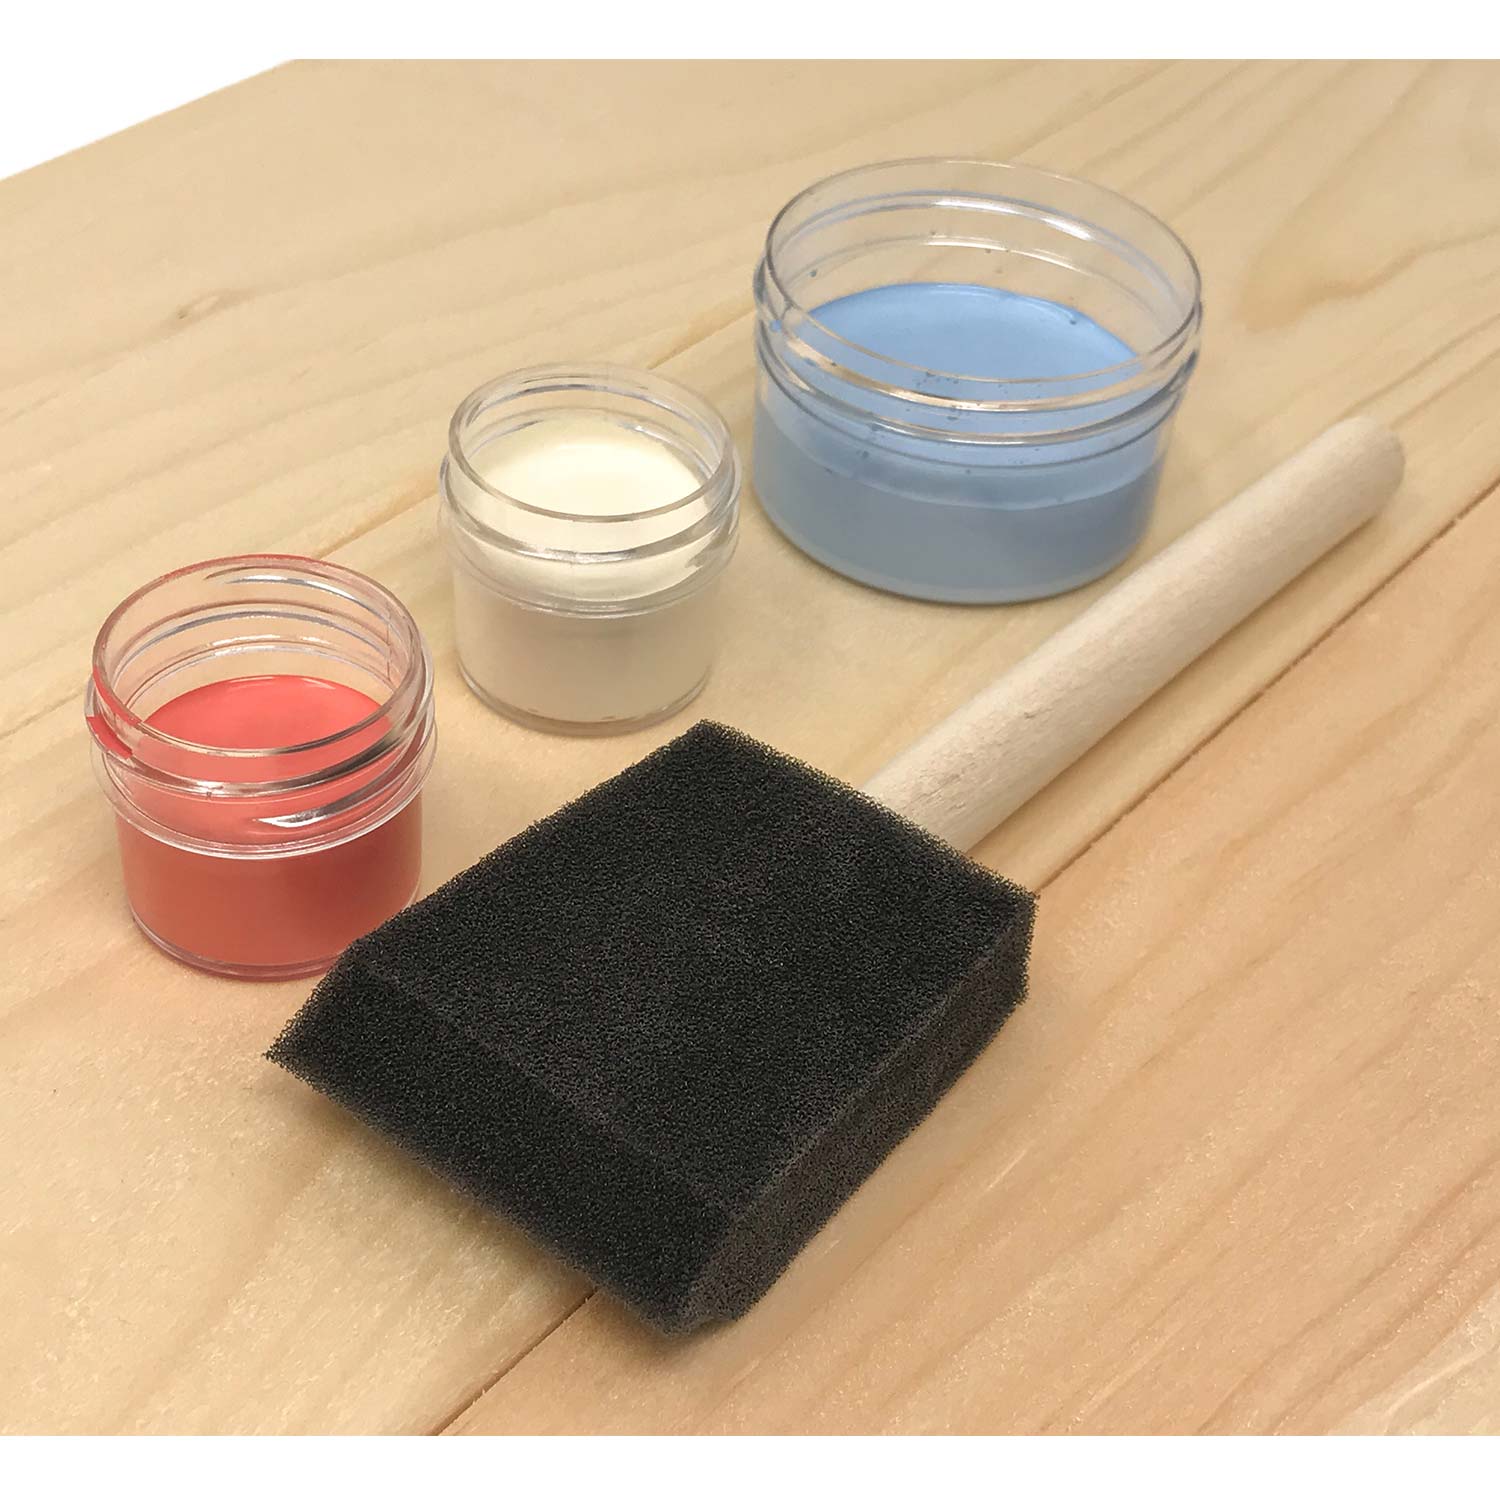 Recommended Painting Kits for Painting at Home